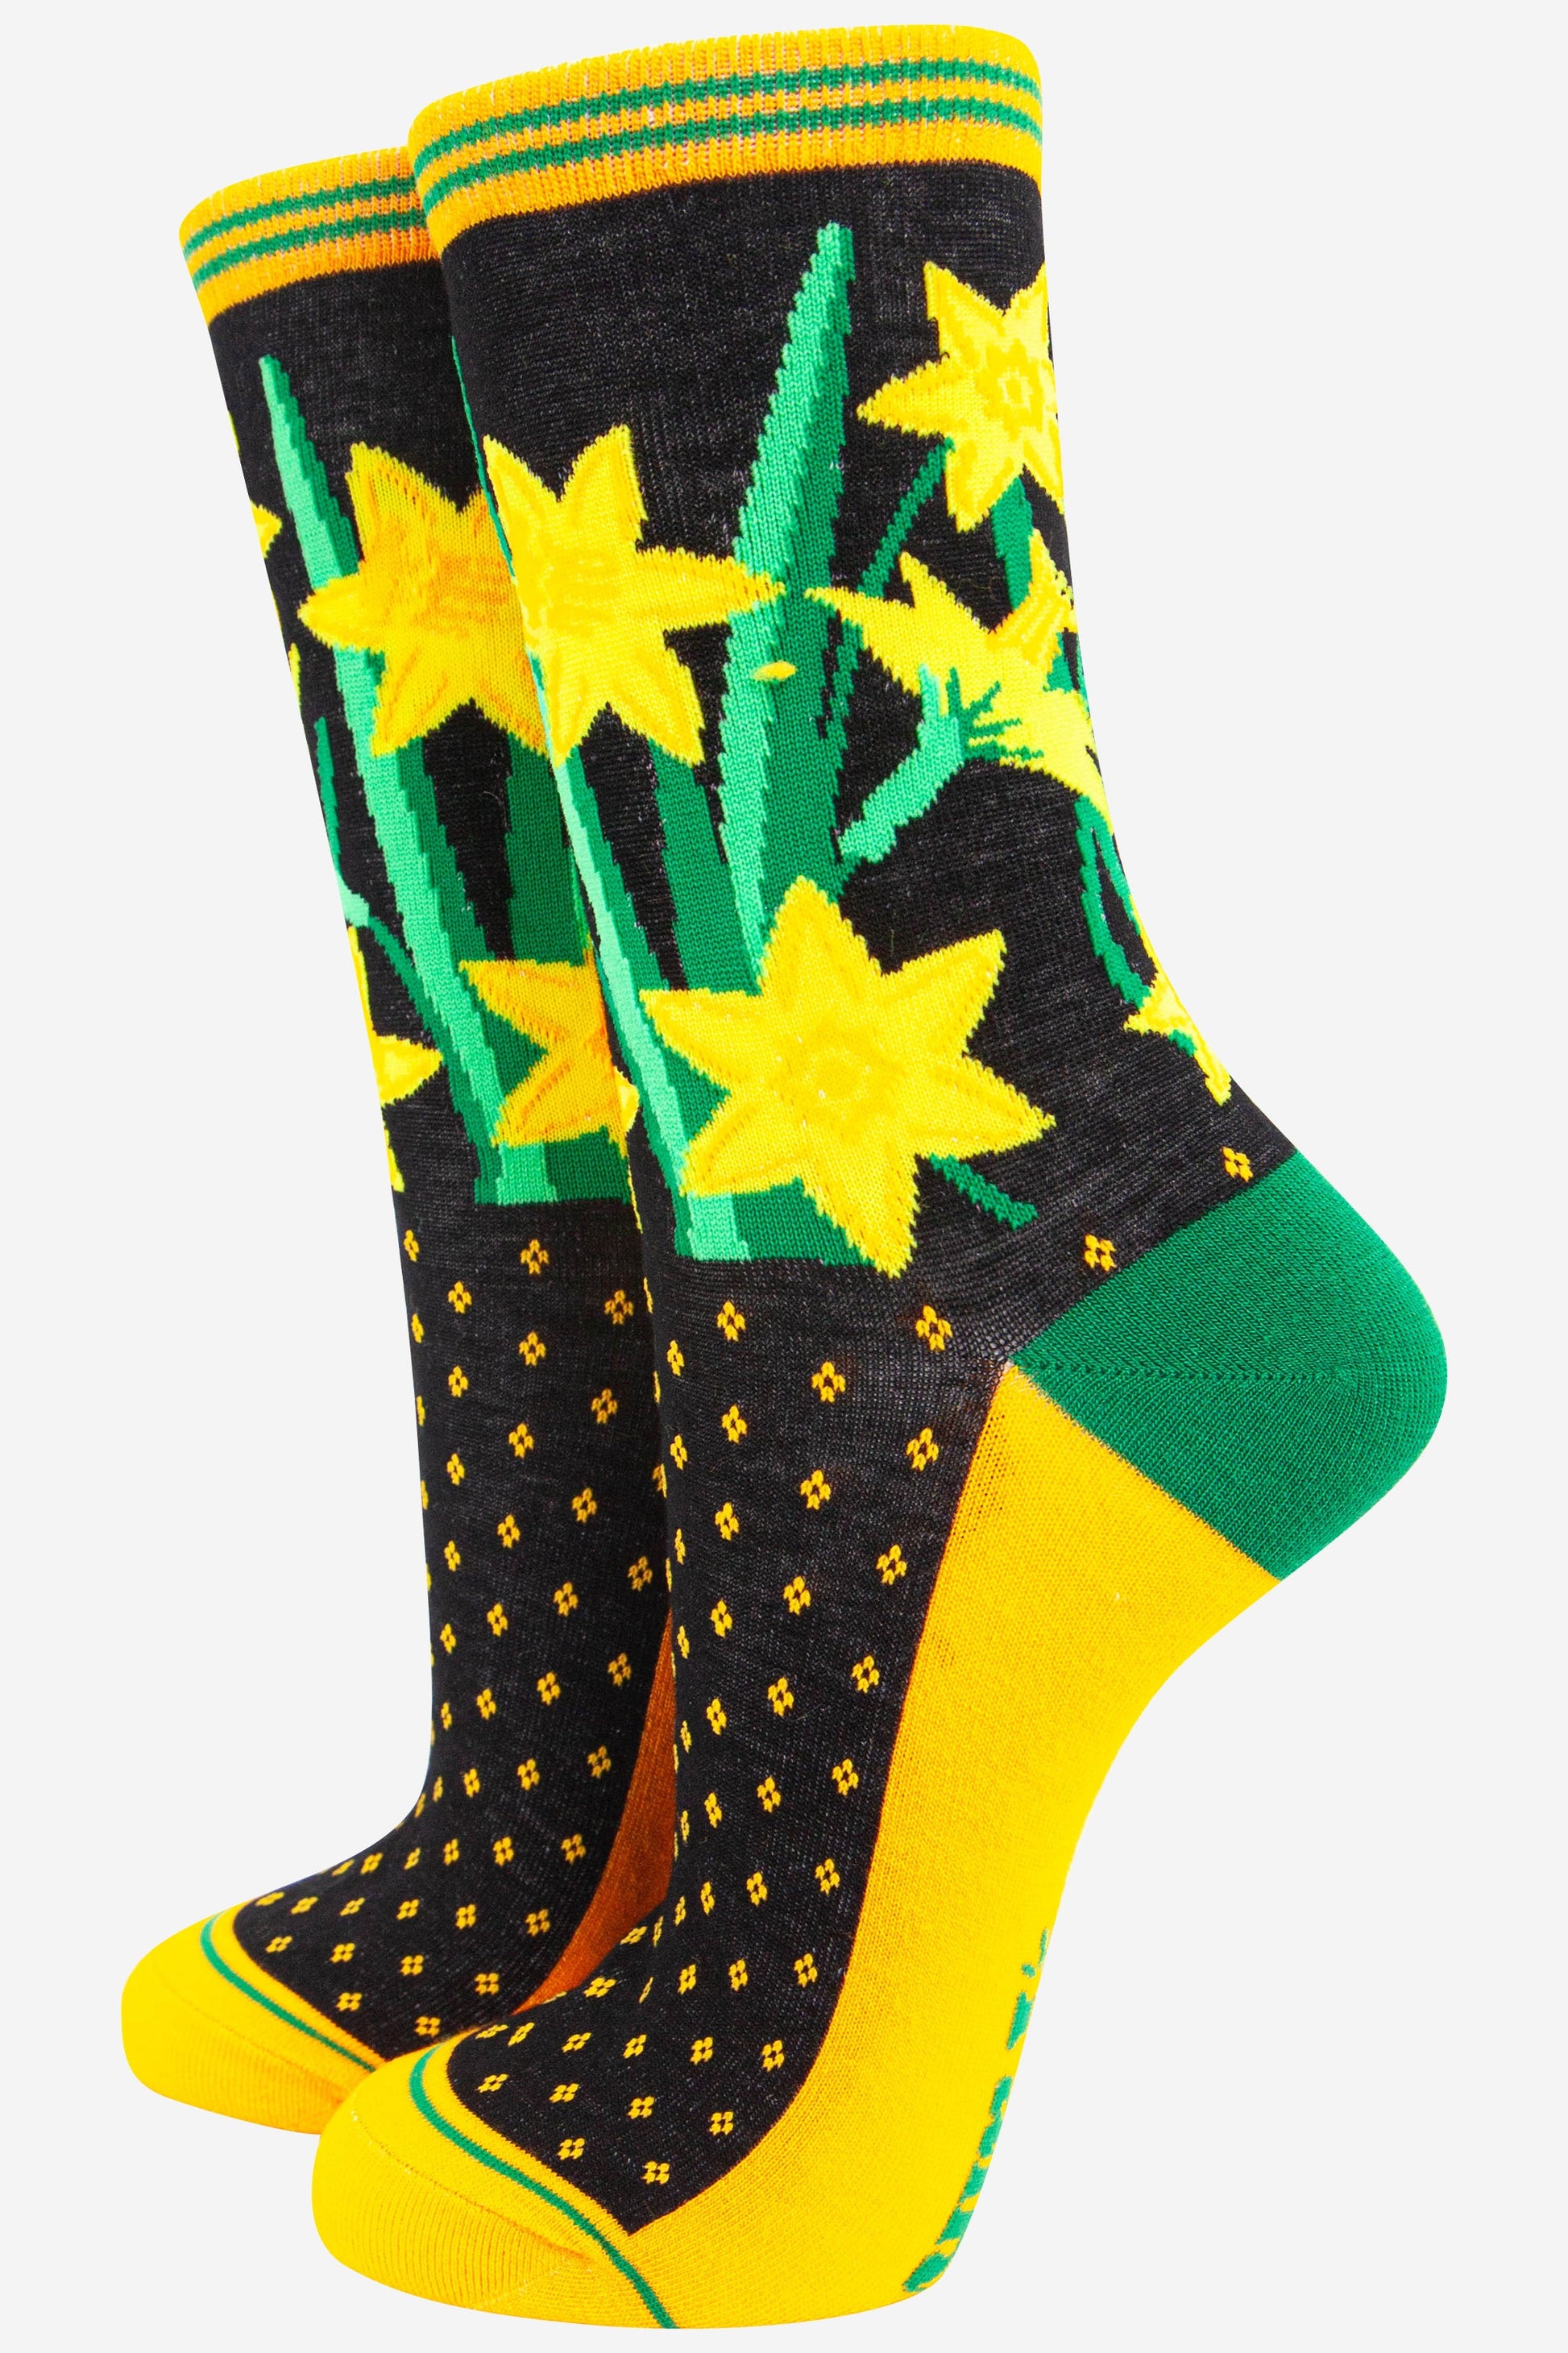 yellow and black ankle socks with a yellow daffodil floral arrangement on the ankle